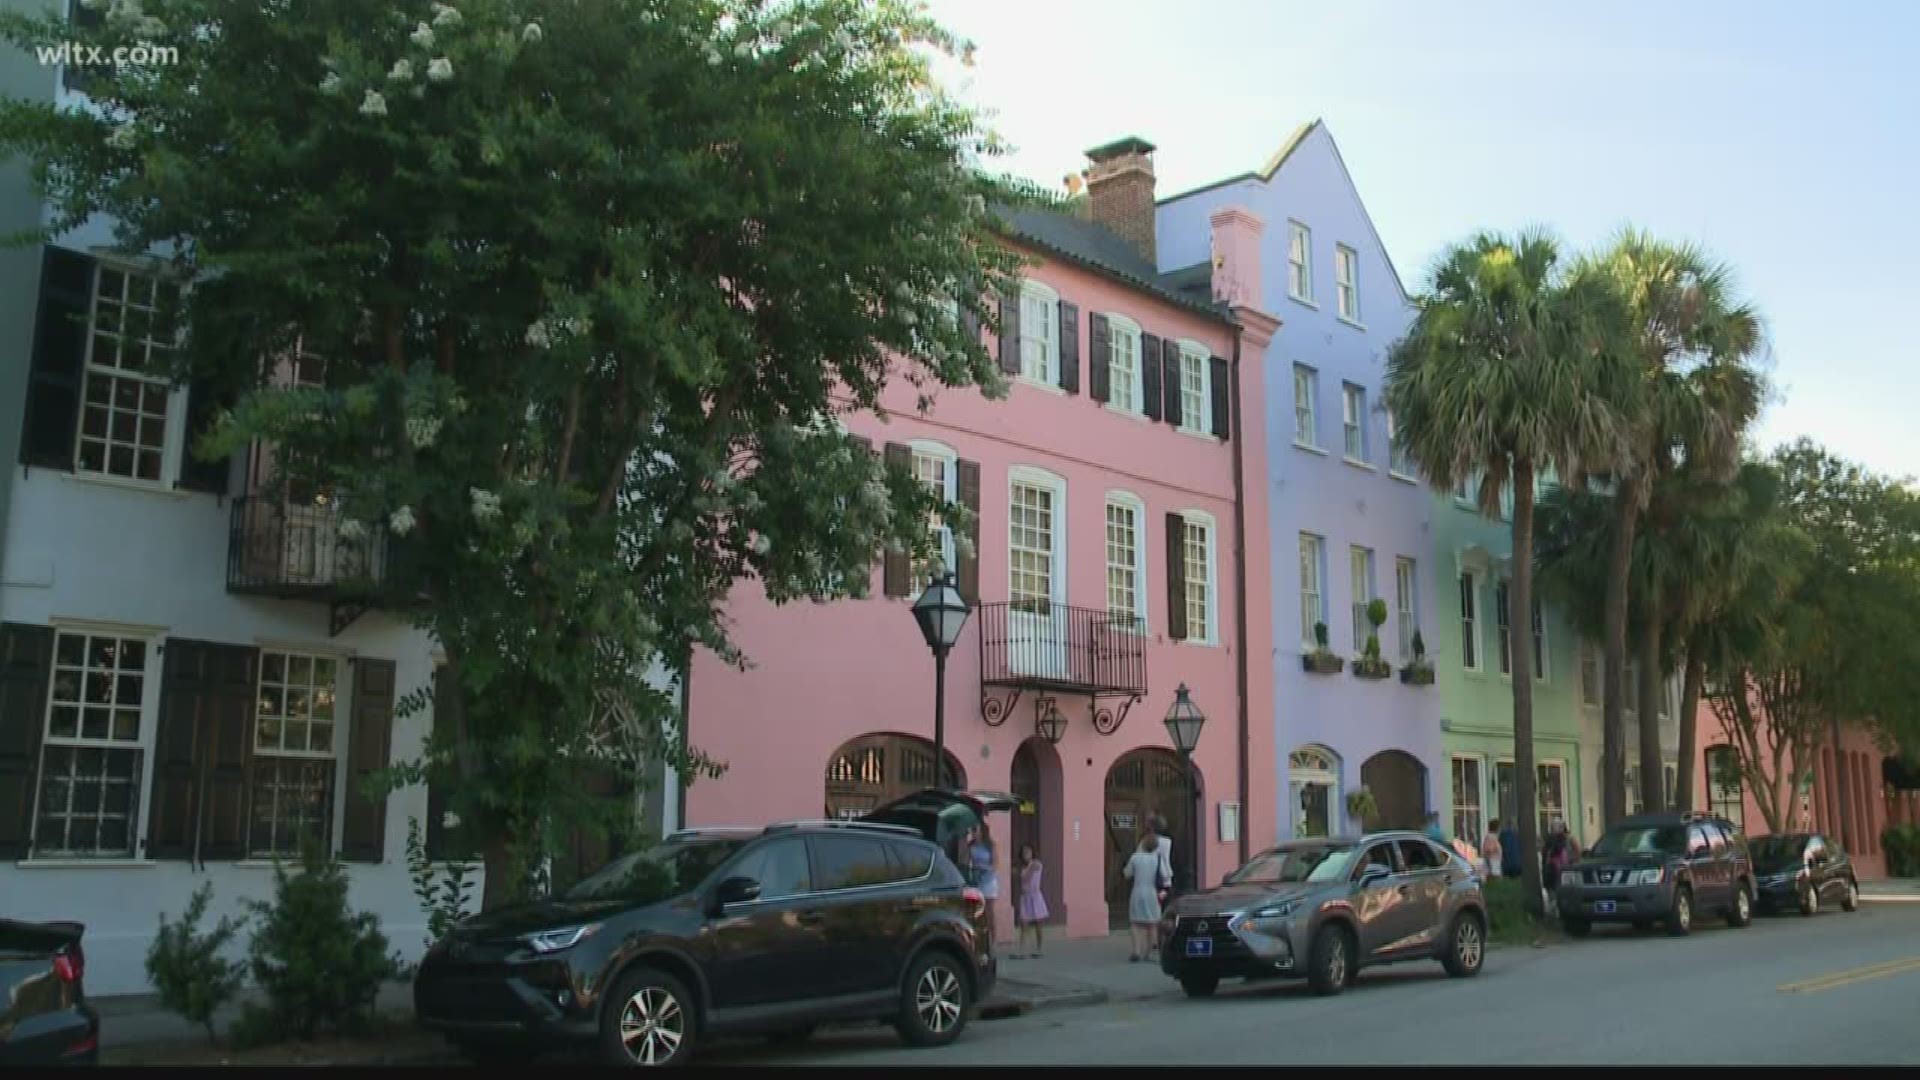 Virus safety has prompted Charleston to make residents stay inside for two weeks